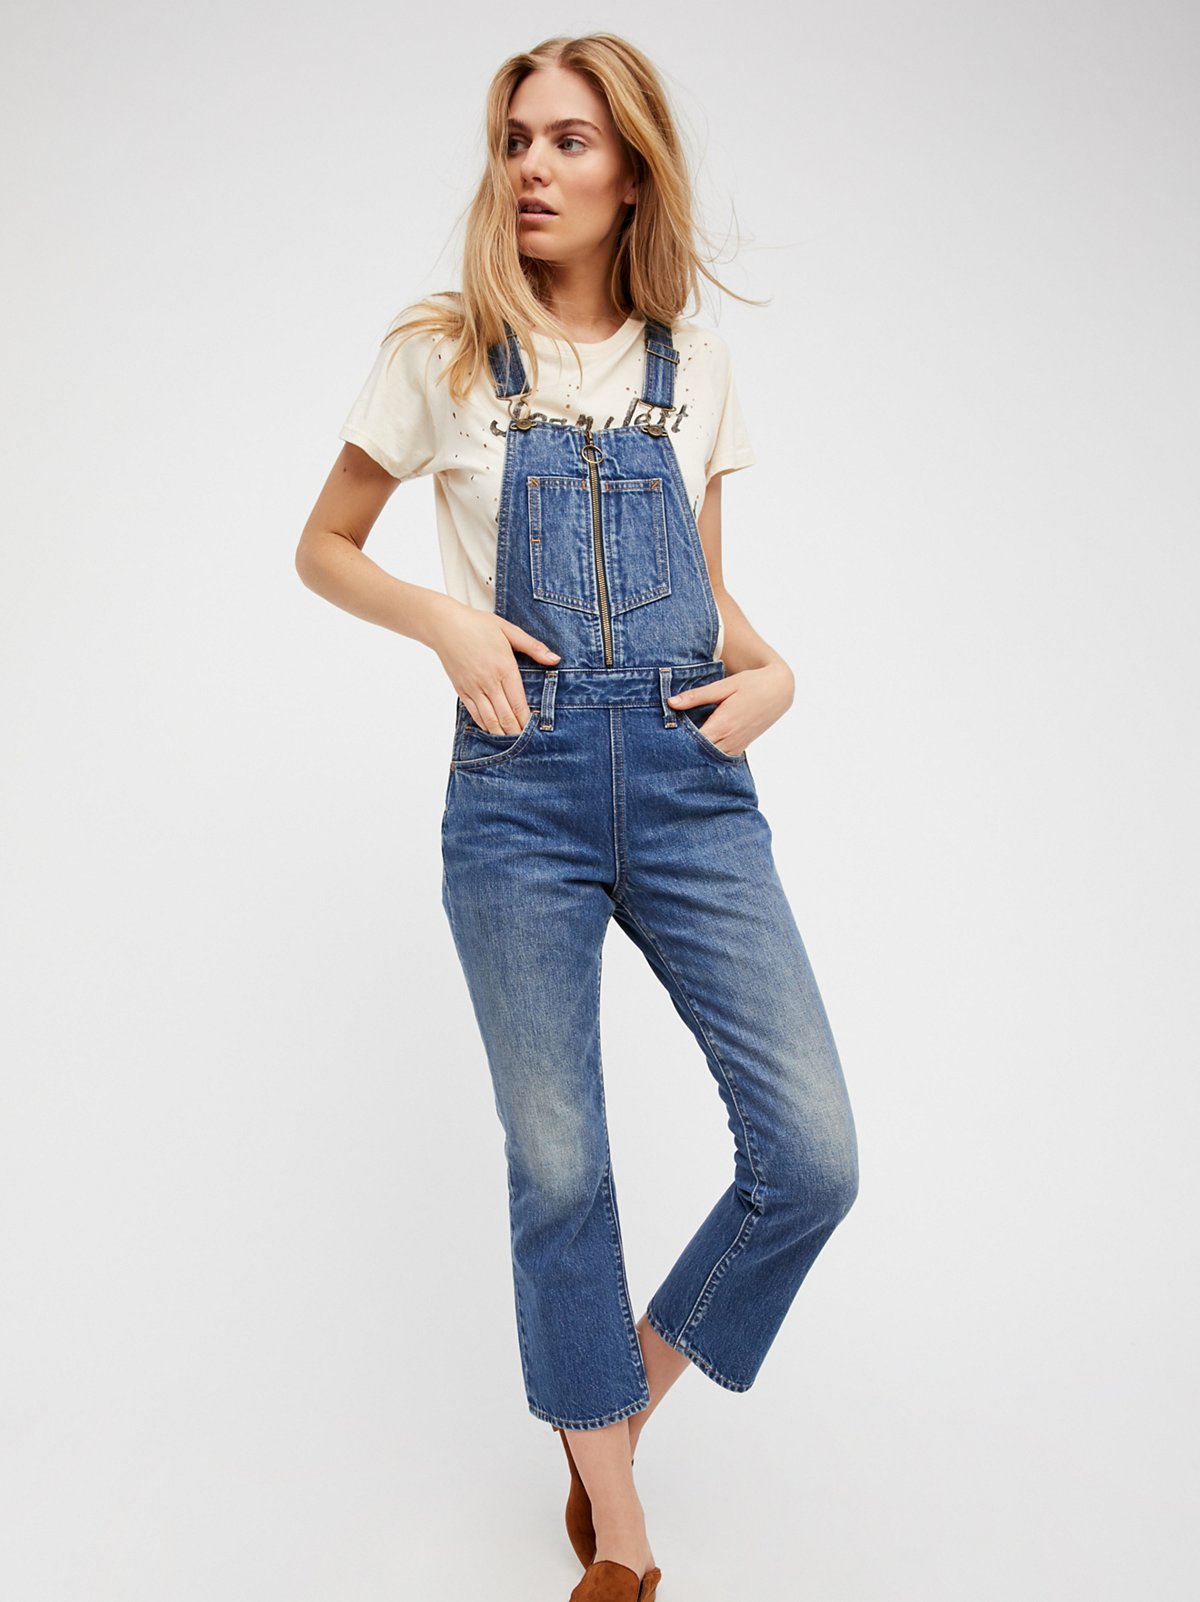 Change your style and look with denim overalls